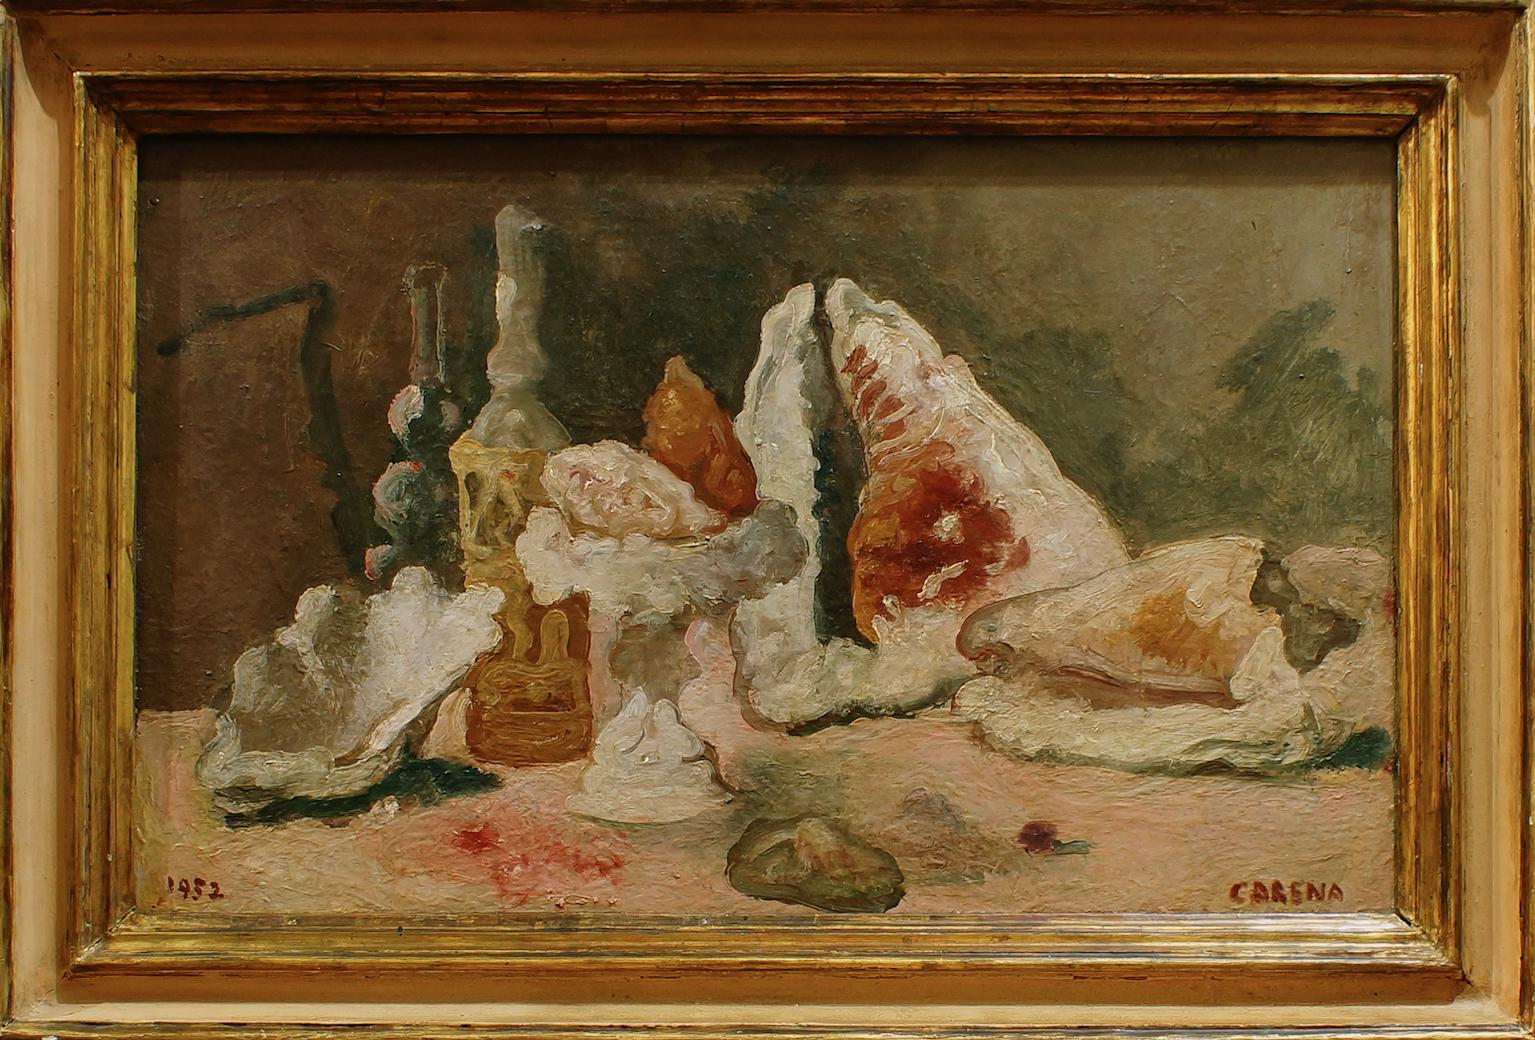 Felice Carena Figurative Painting - Still Life - Original Oil on Canvas by F. Carena - 1952 